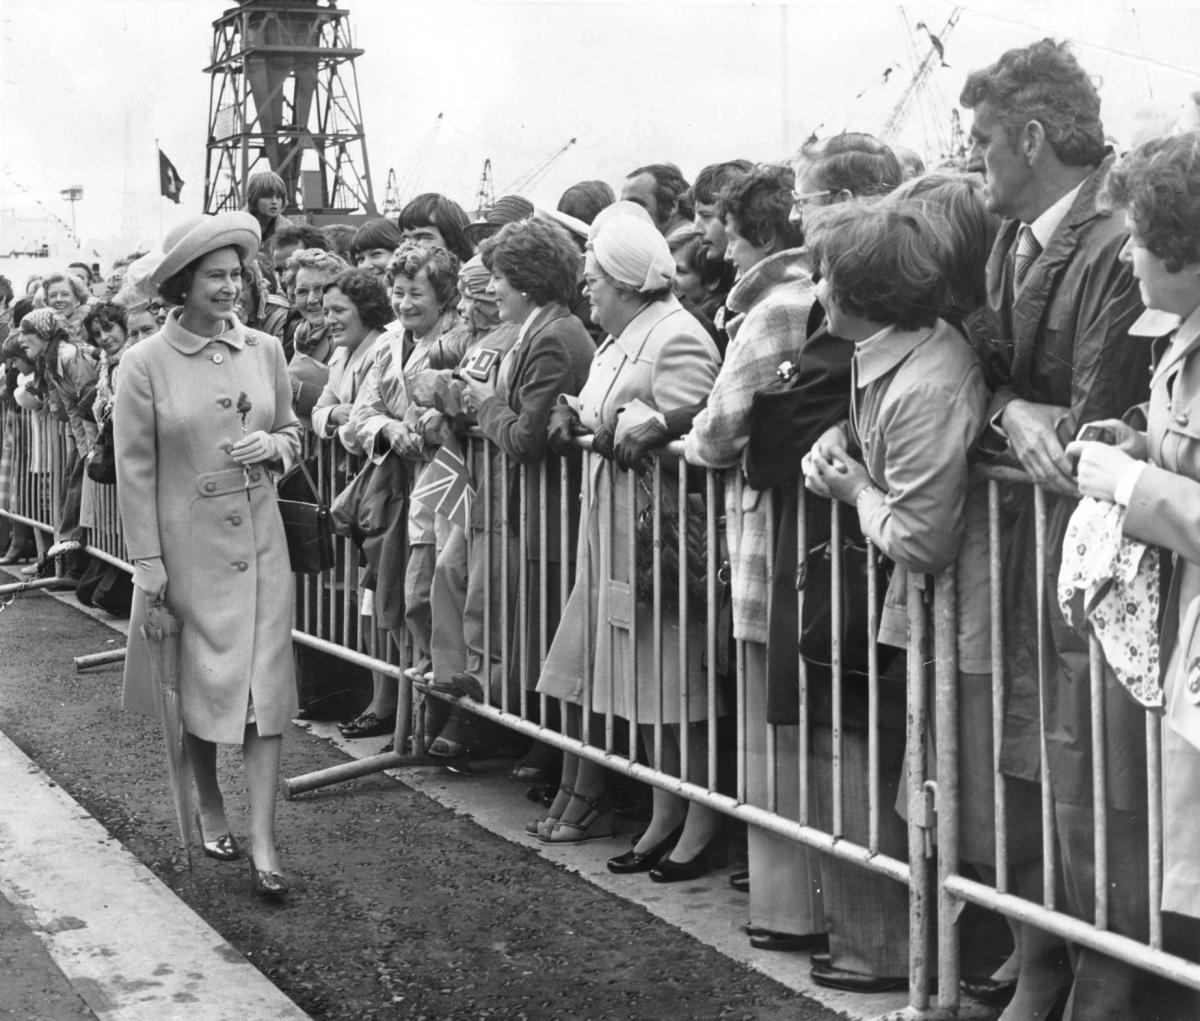 Queen Elizabeth disembarks from the Royal yacht, Britannia, at Tees Dock, Middlesbrough during her Silver Jubille tour of the region